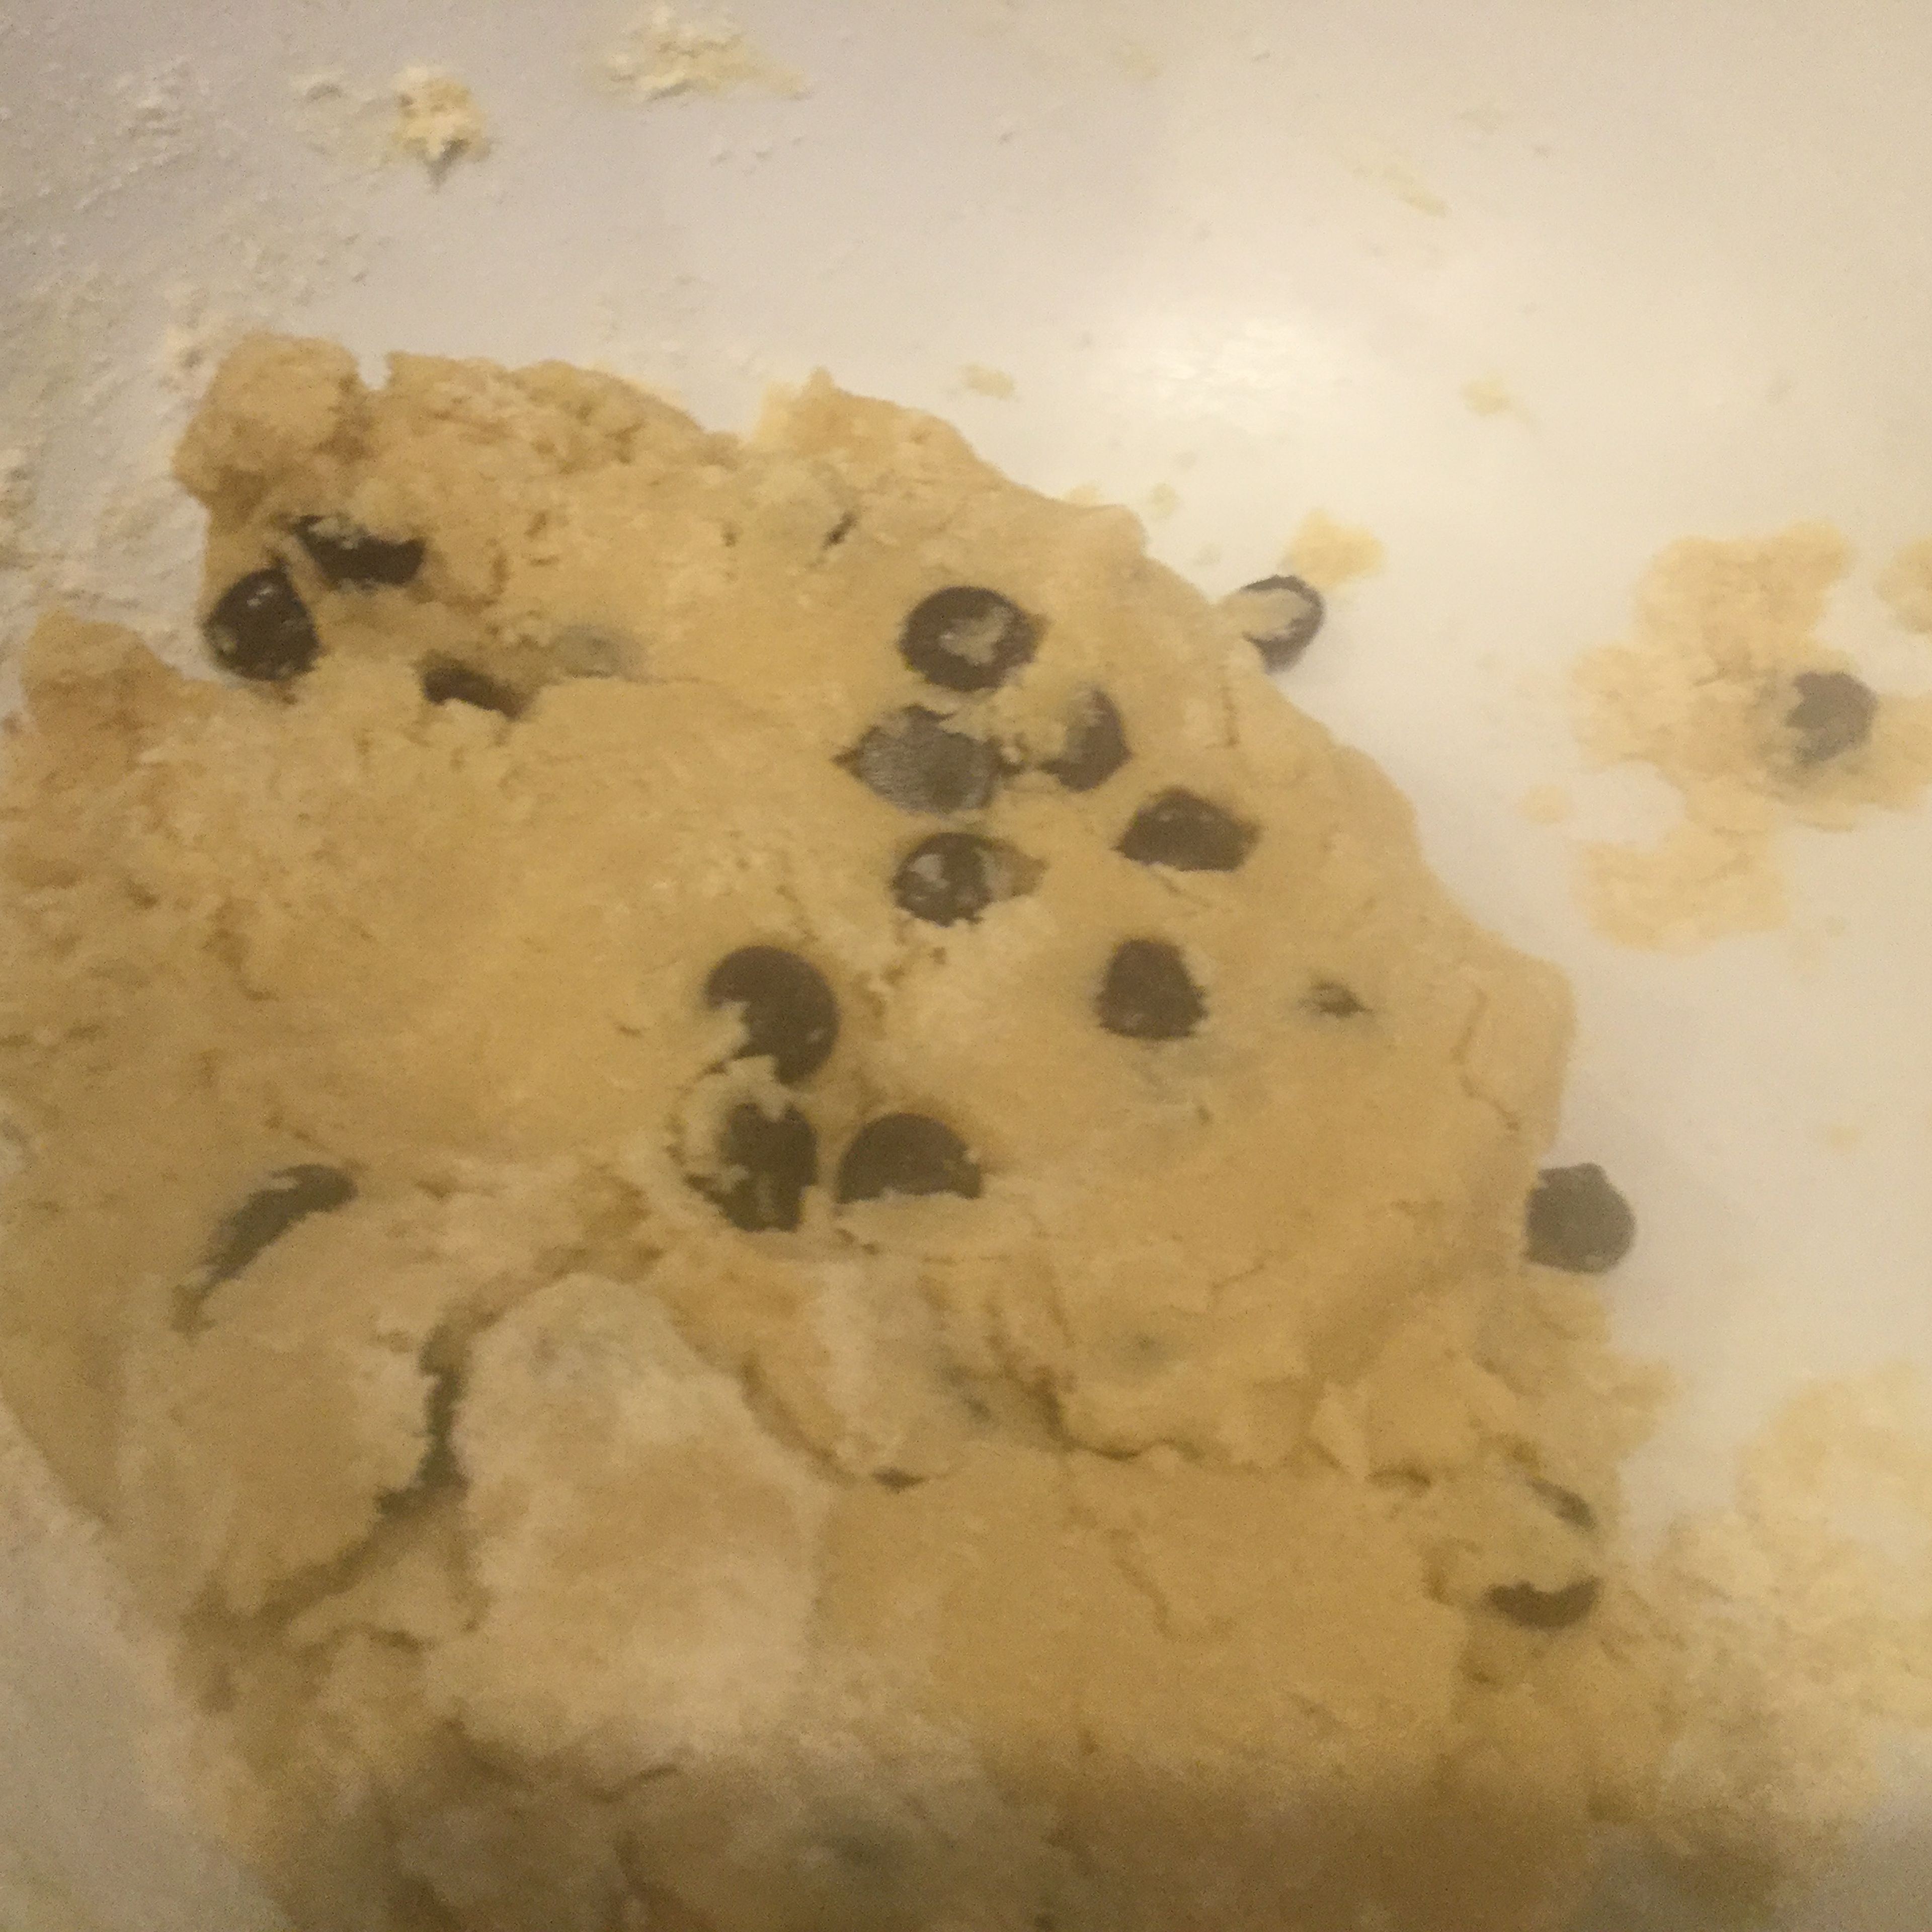 Slowly mix in flour mixture and chocolate chips.